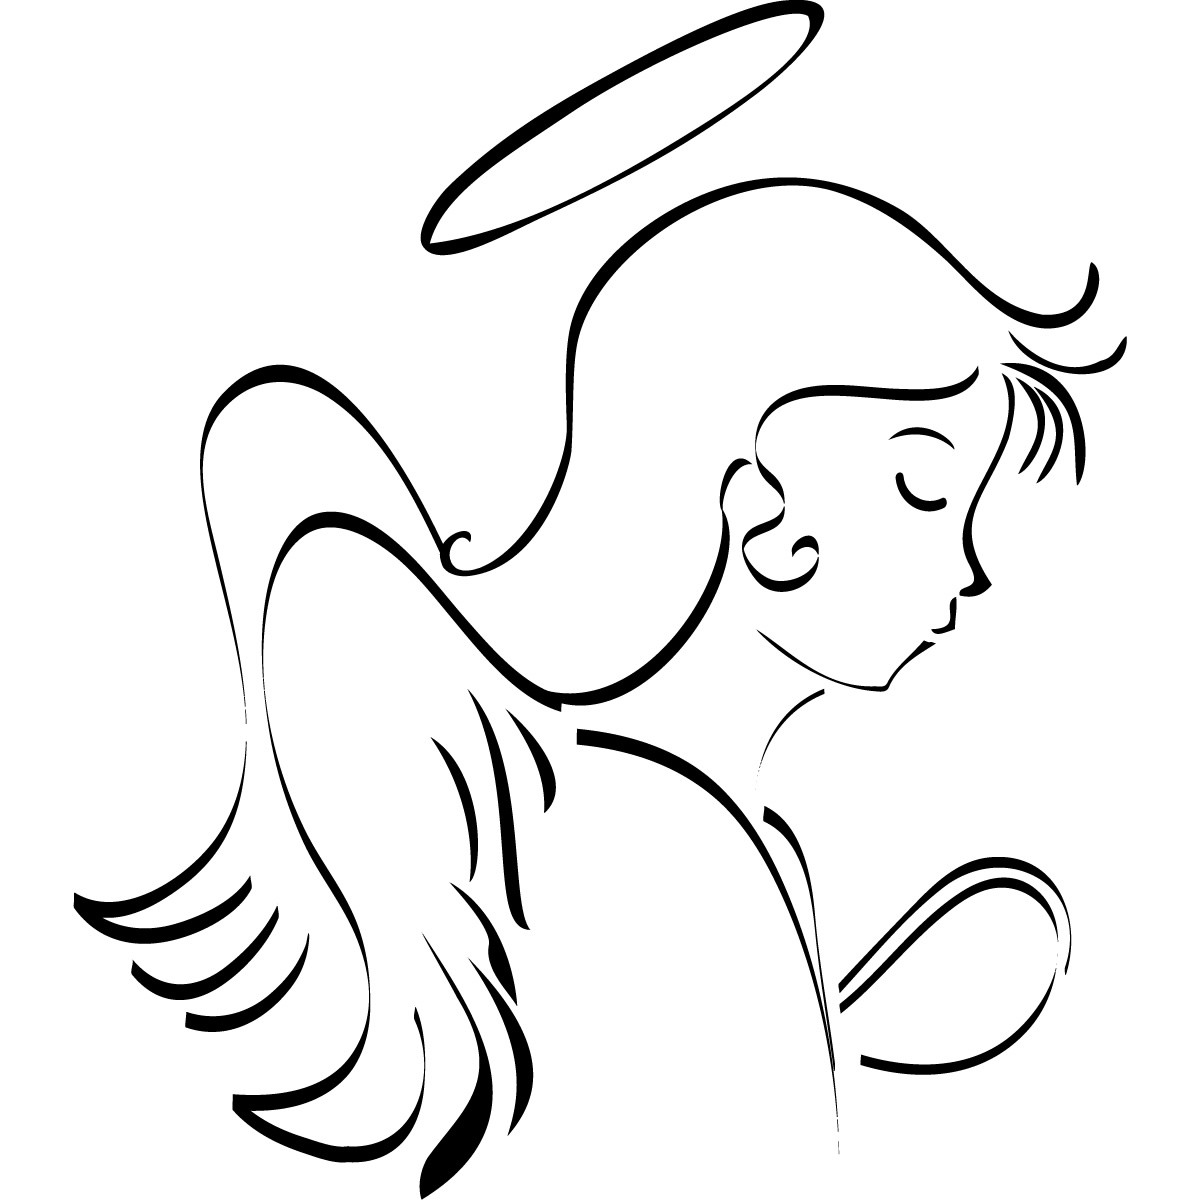 Angel Line Drawing - ClipArt Best